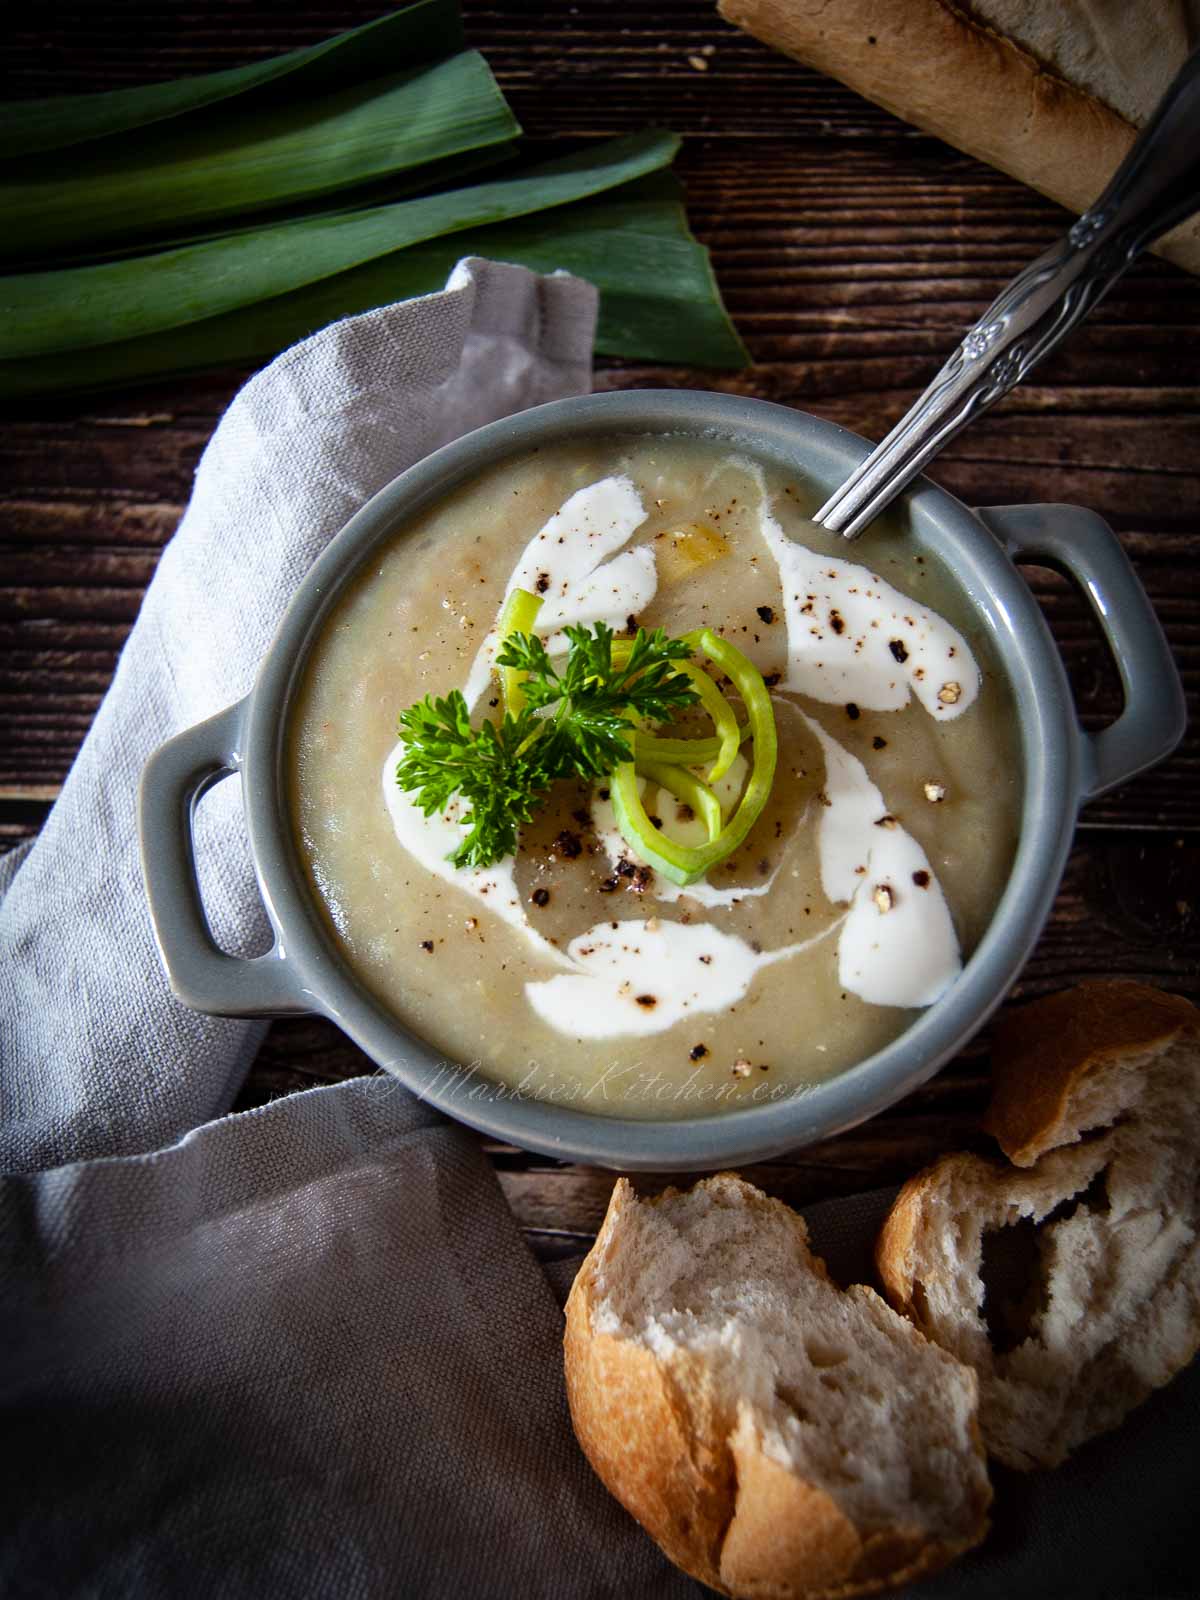 A photo of a bowl of soup with cream, and herbs on top, served with a rustic baguette.